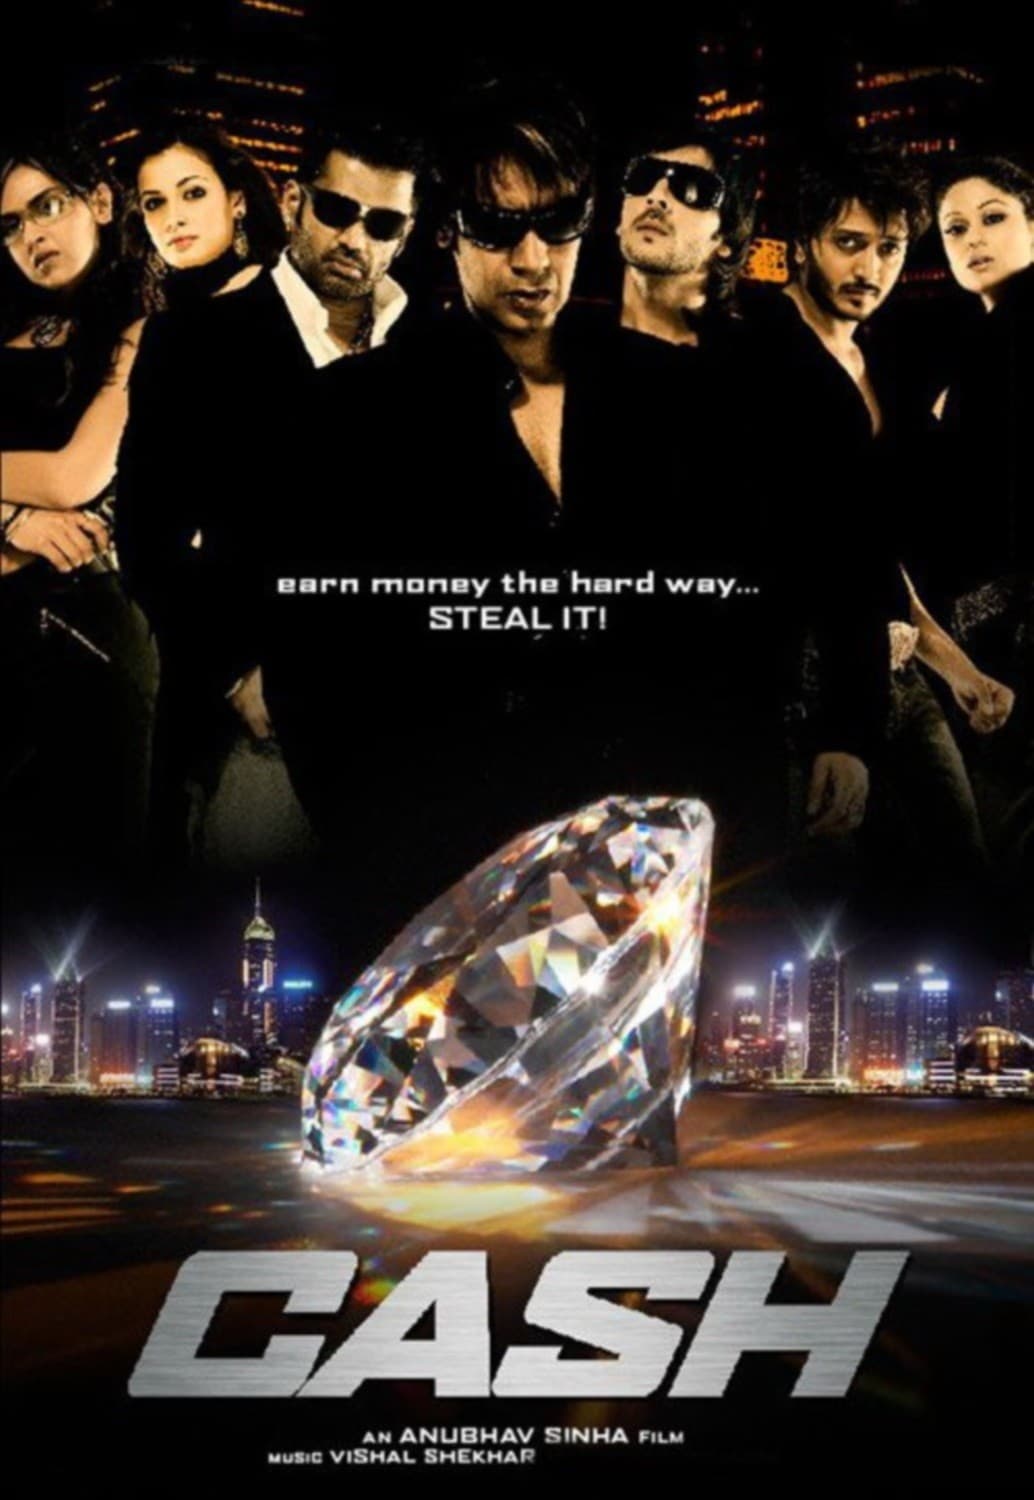 Poster for the movie "Cash"